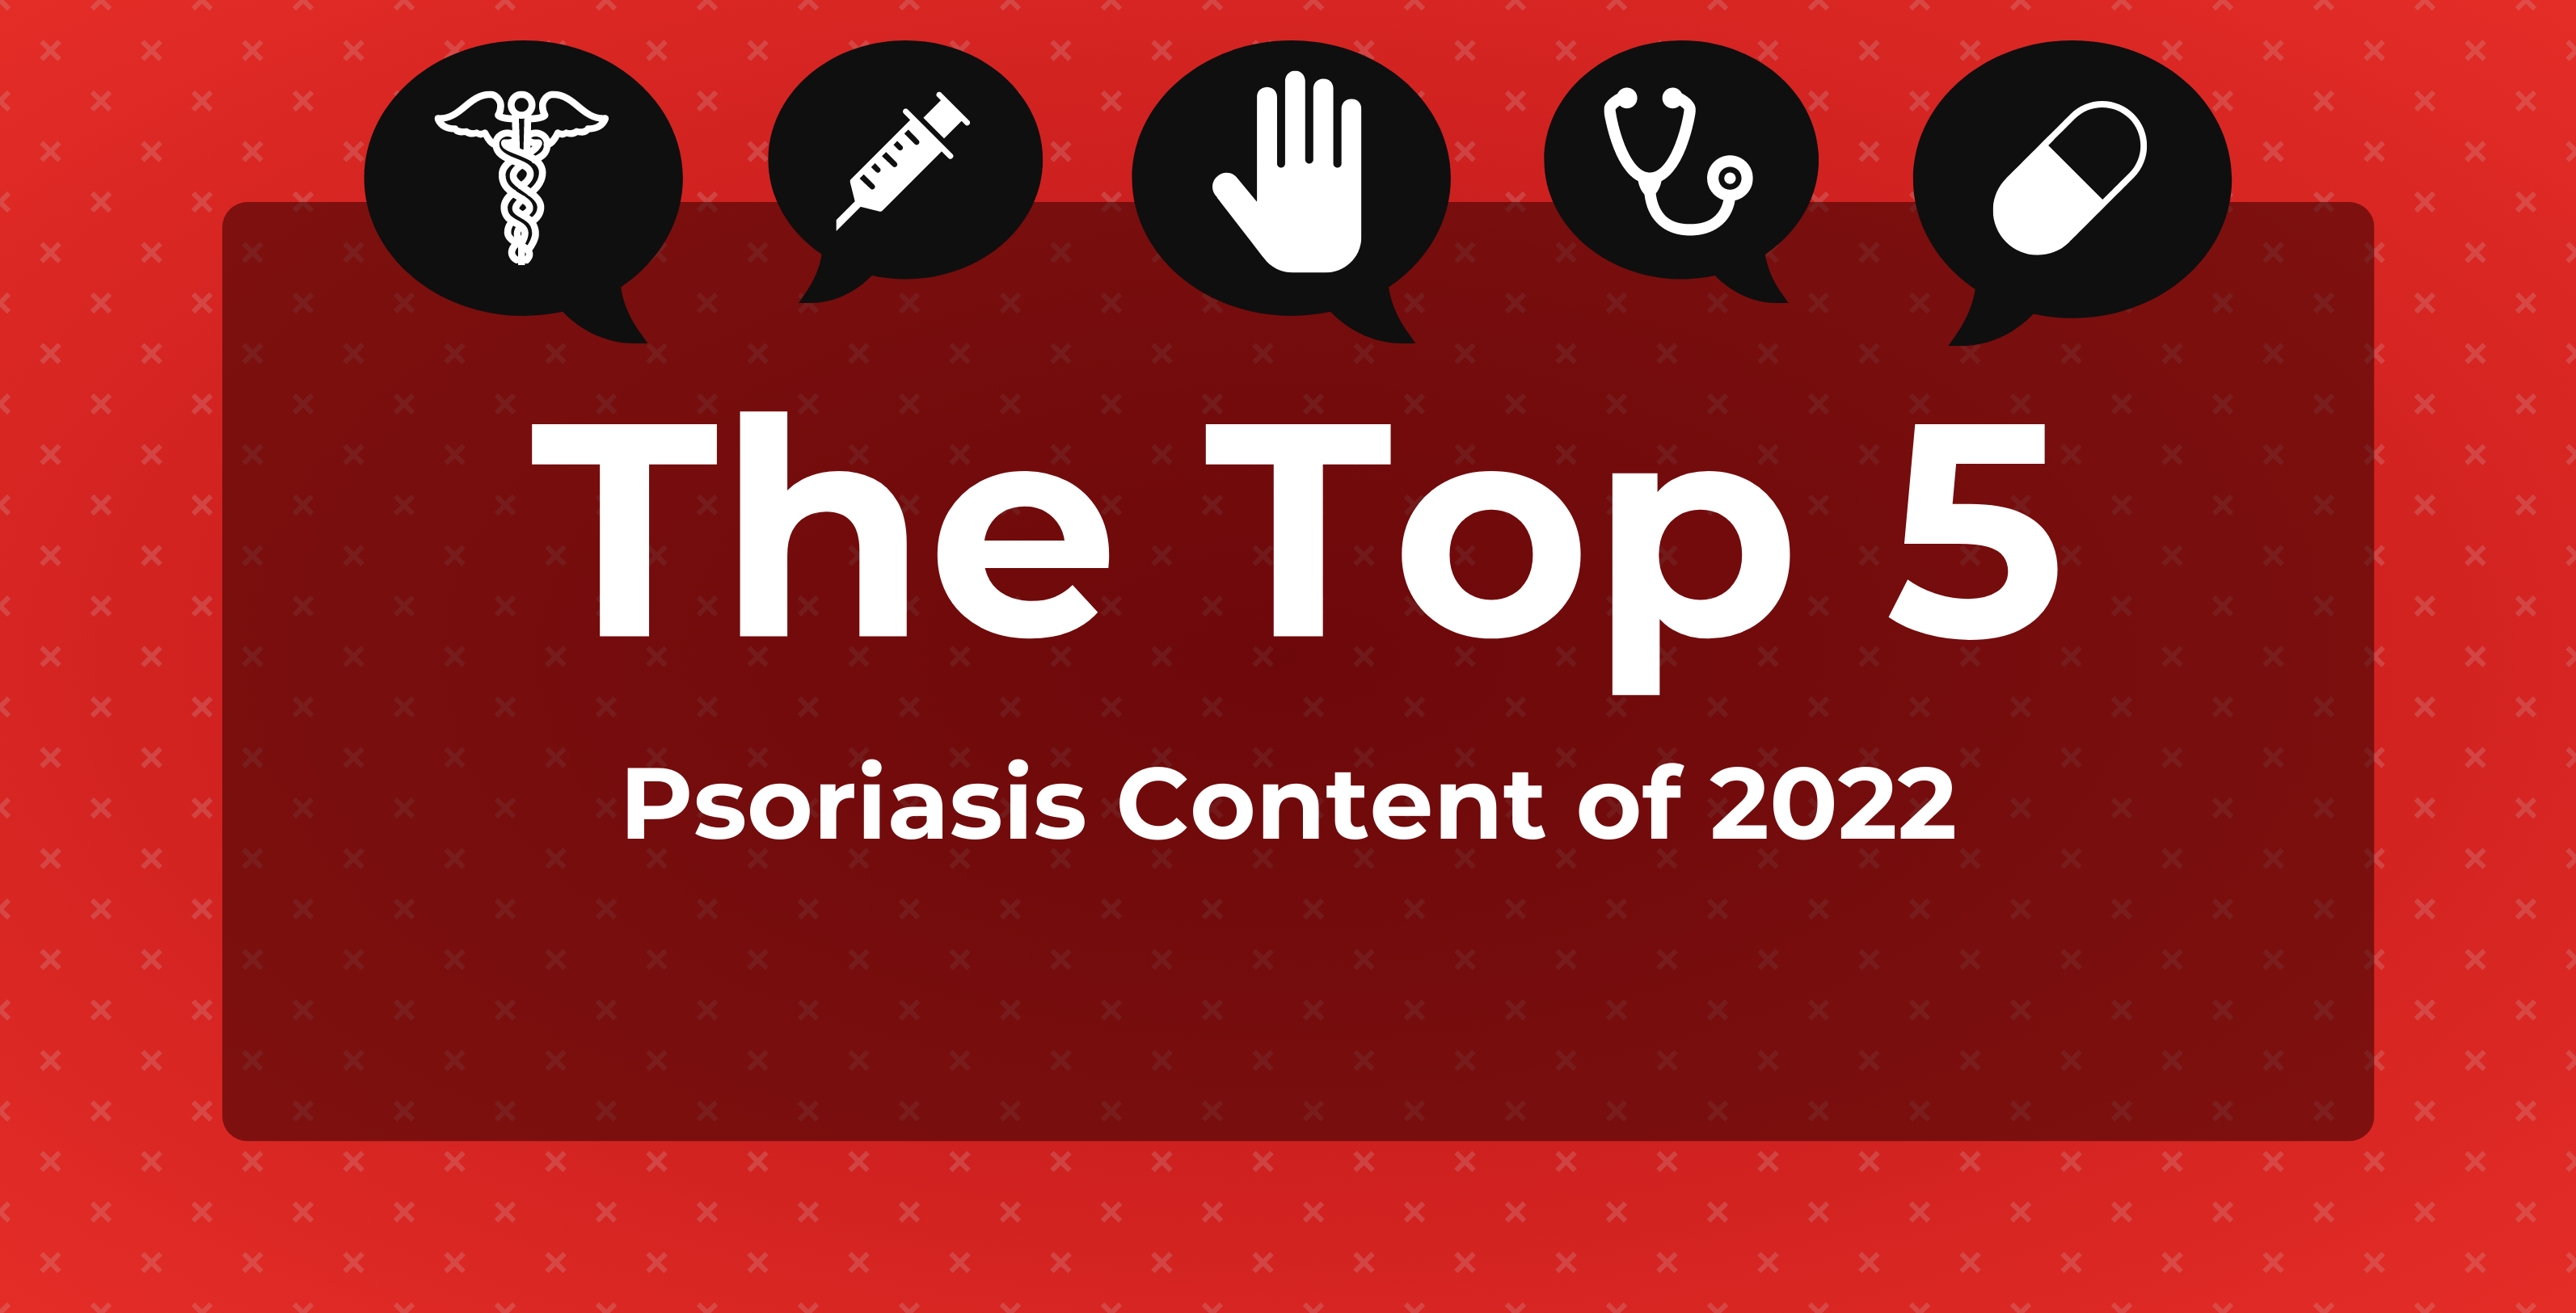 image with the language "The Top 5 Psoriasis Content of 2022"